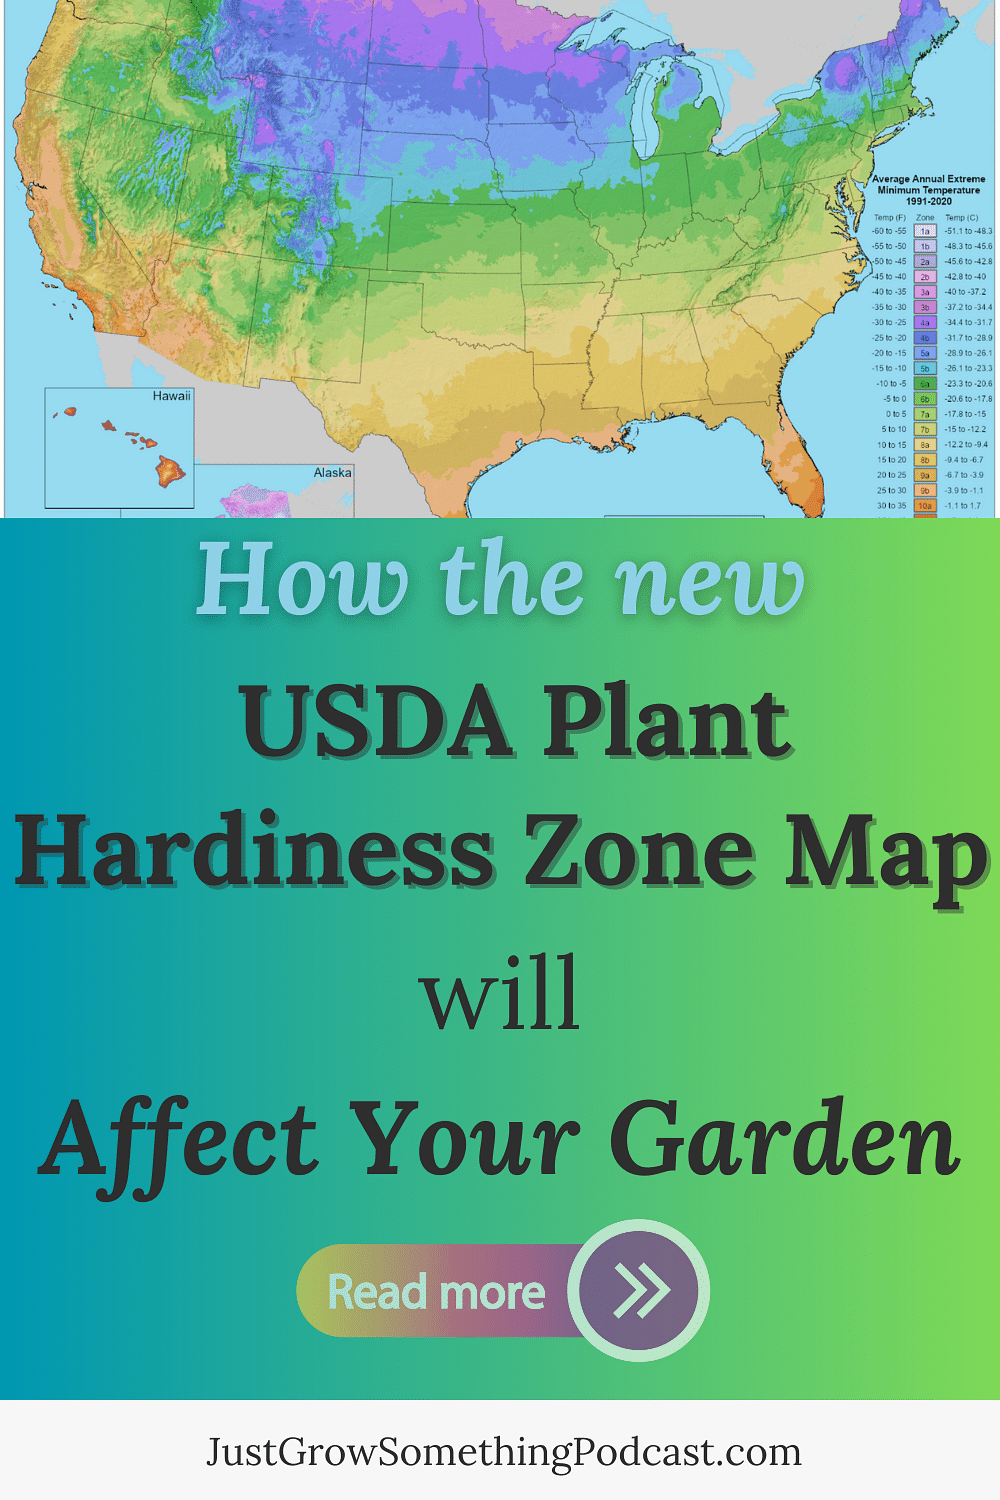 New Usda Plant Hardiness Zone Map How Will It Affect Your Garden Just Grow Something With 9423